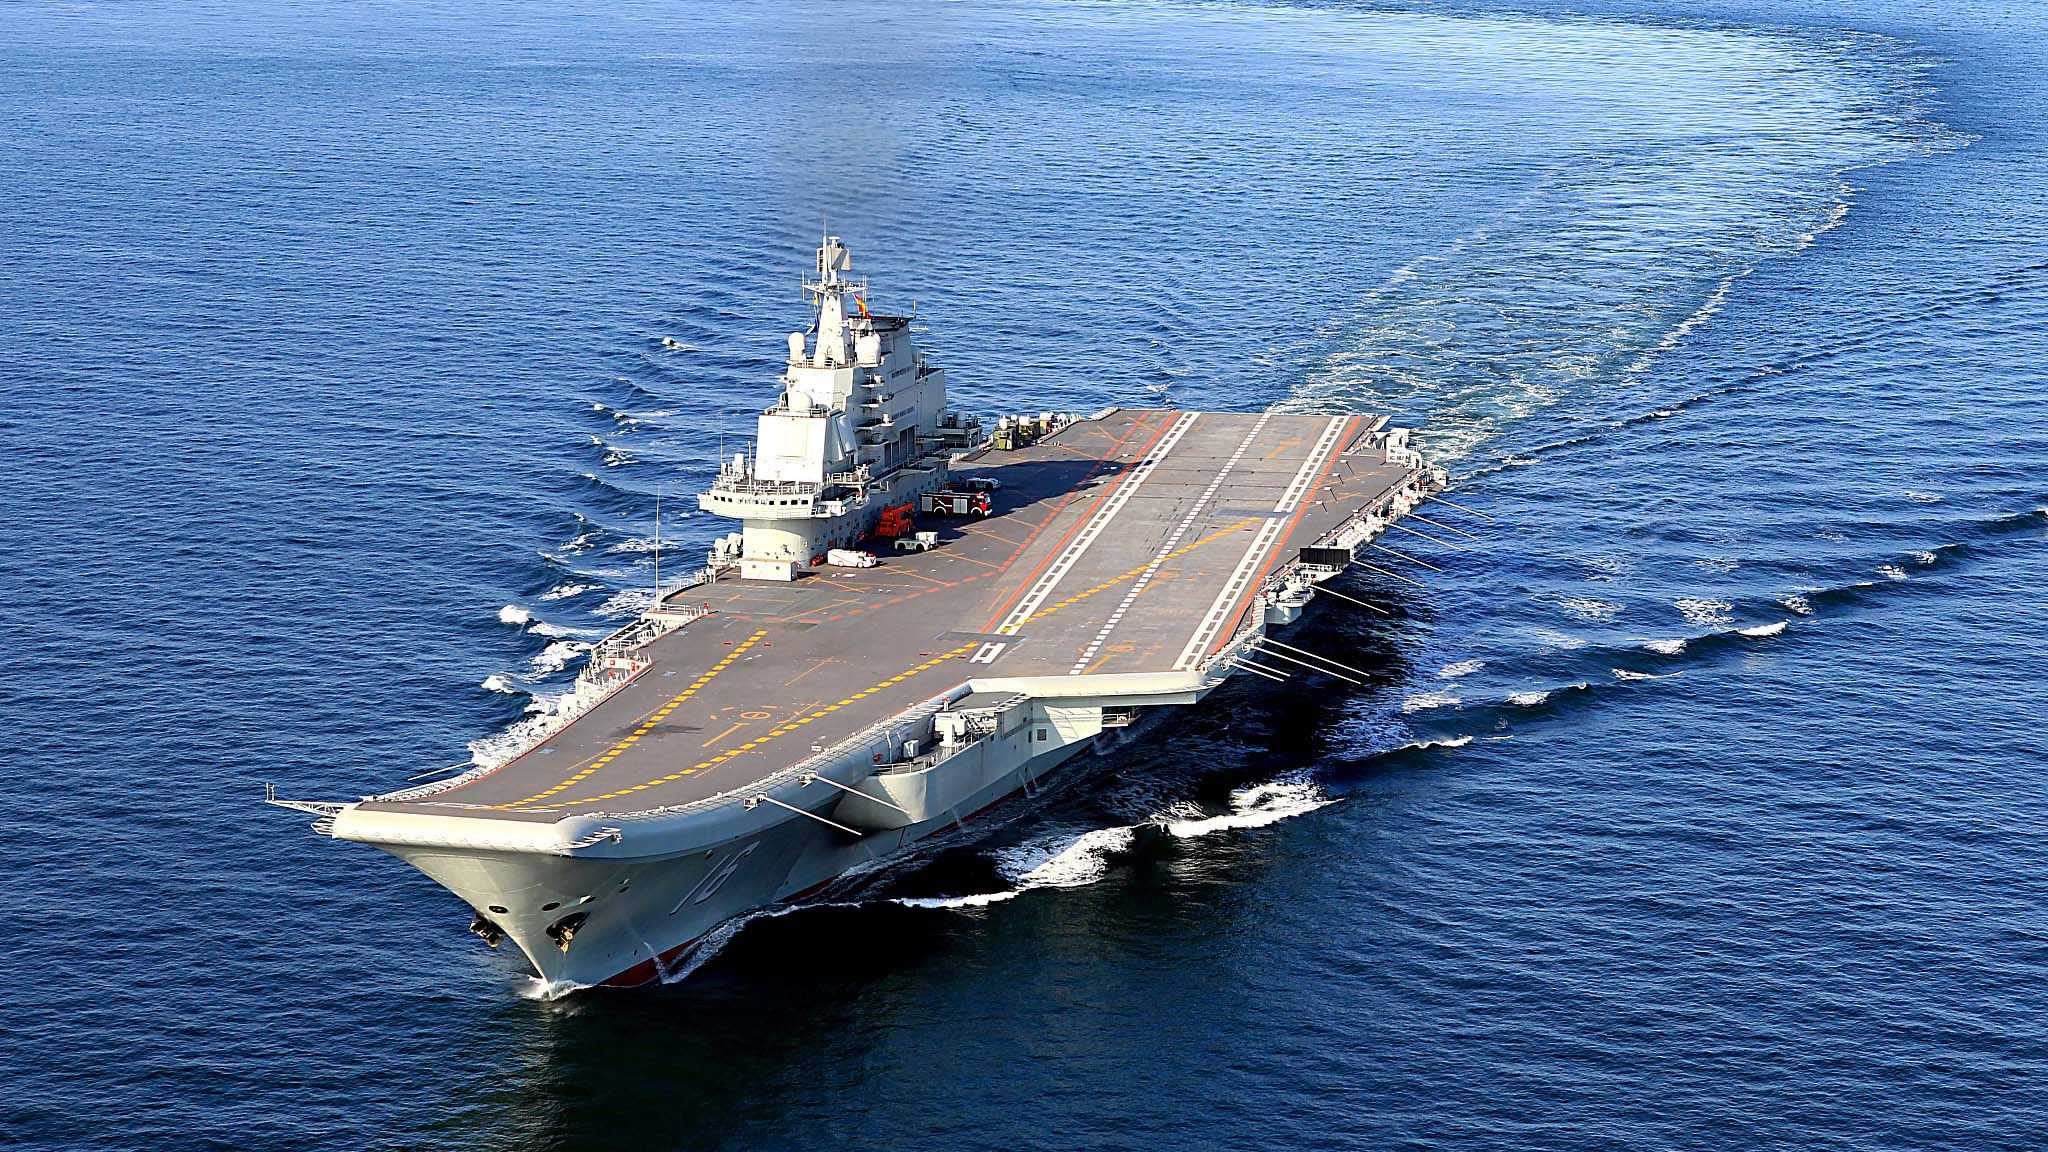 Work underway to enhance capabilities of Chinas aircraft carrier Liaoning 